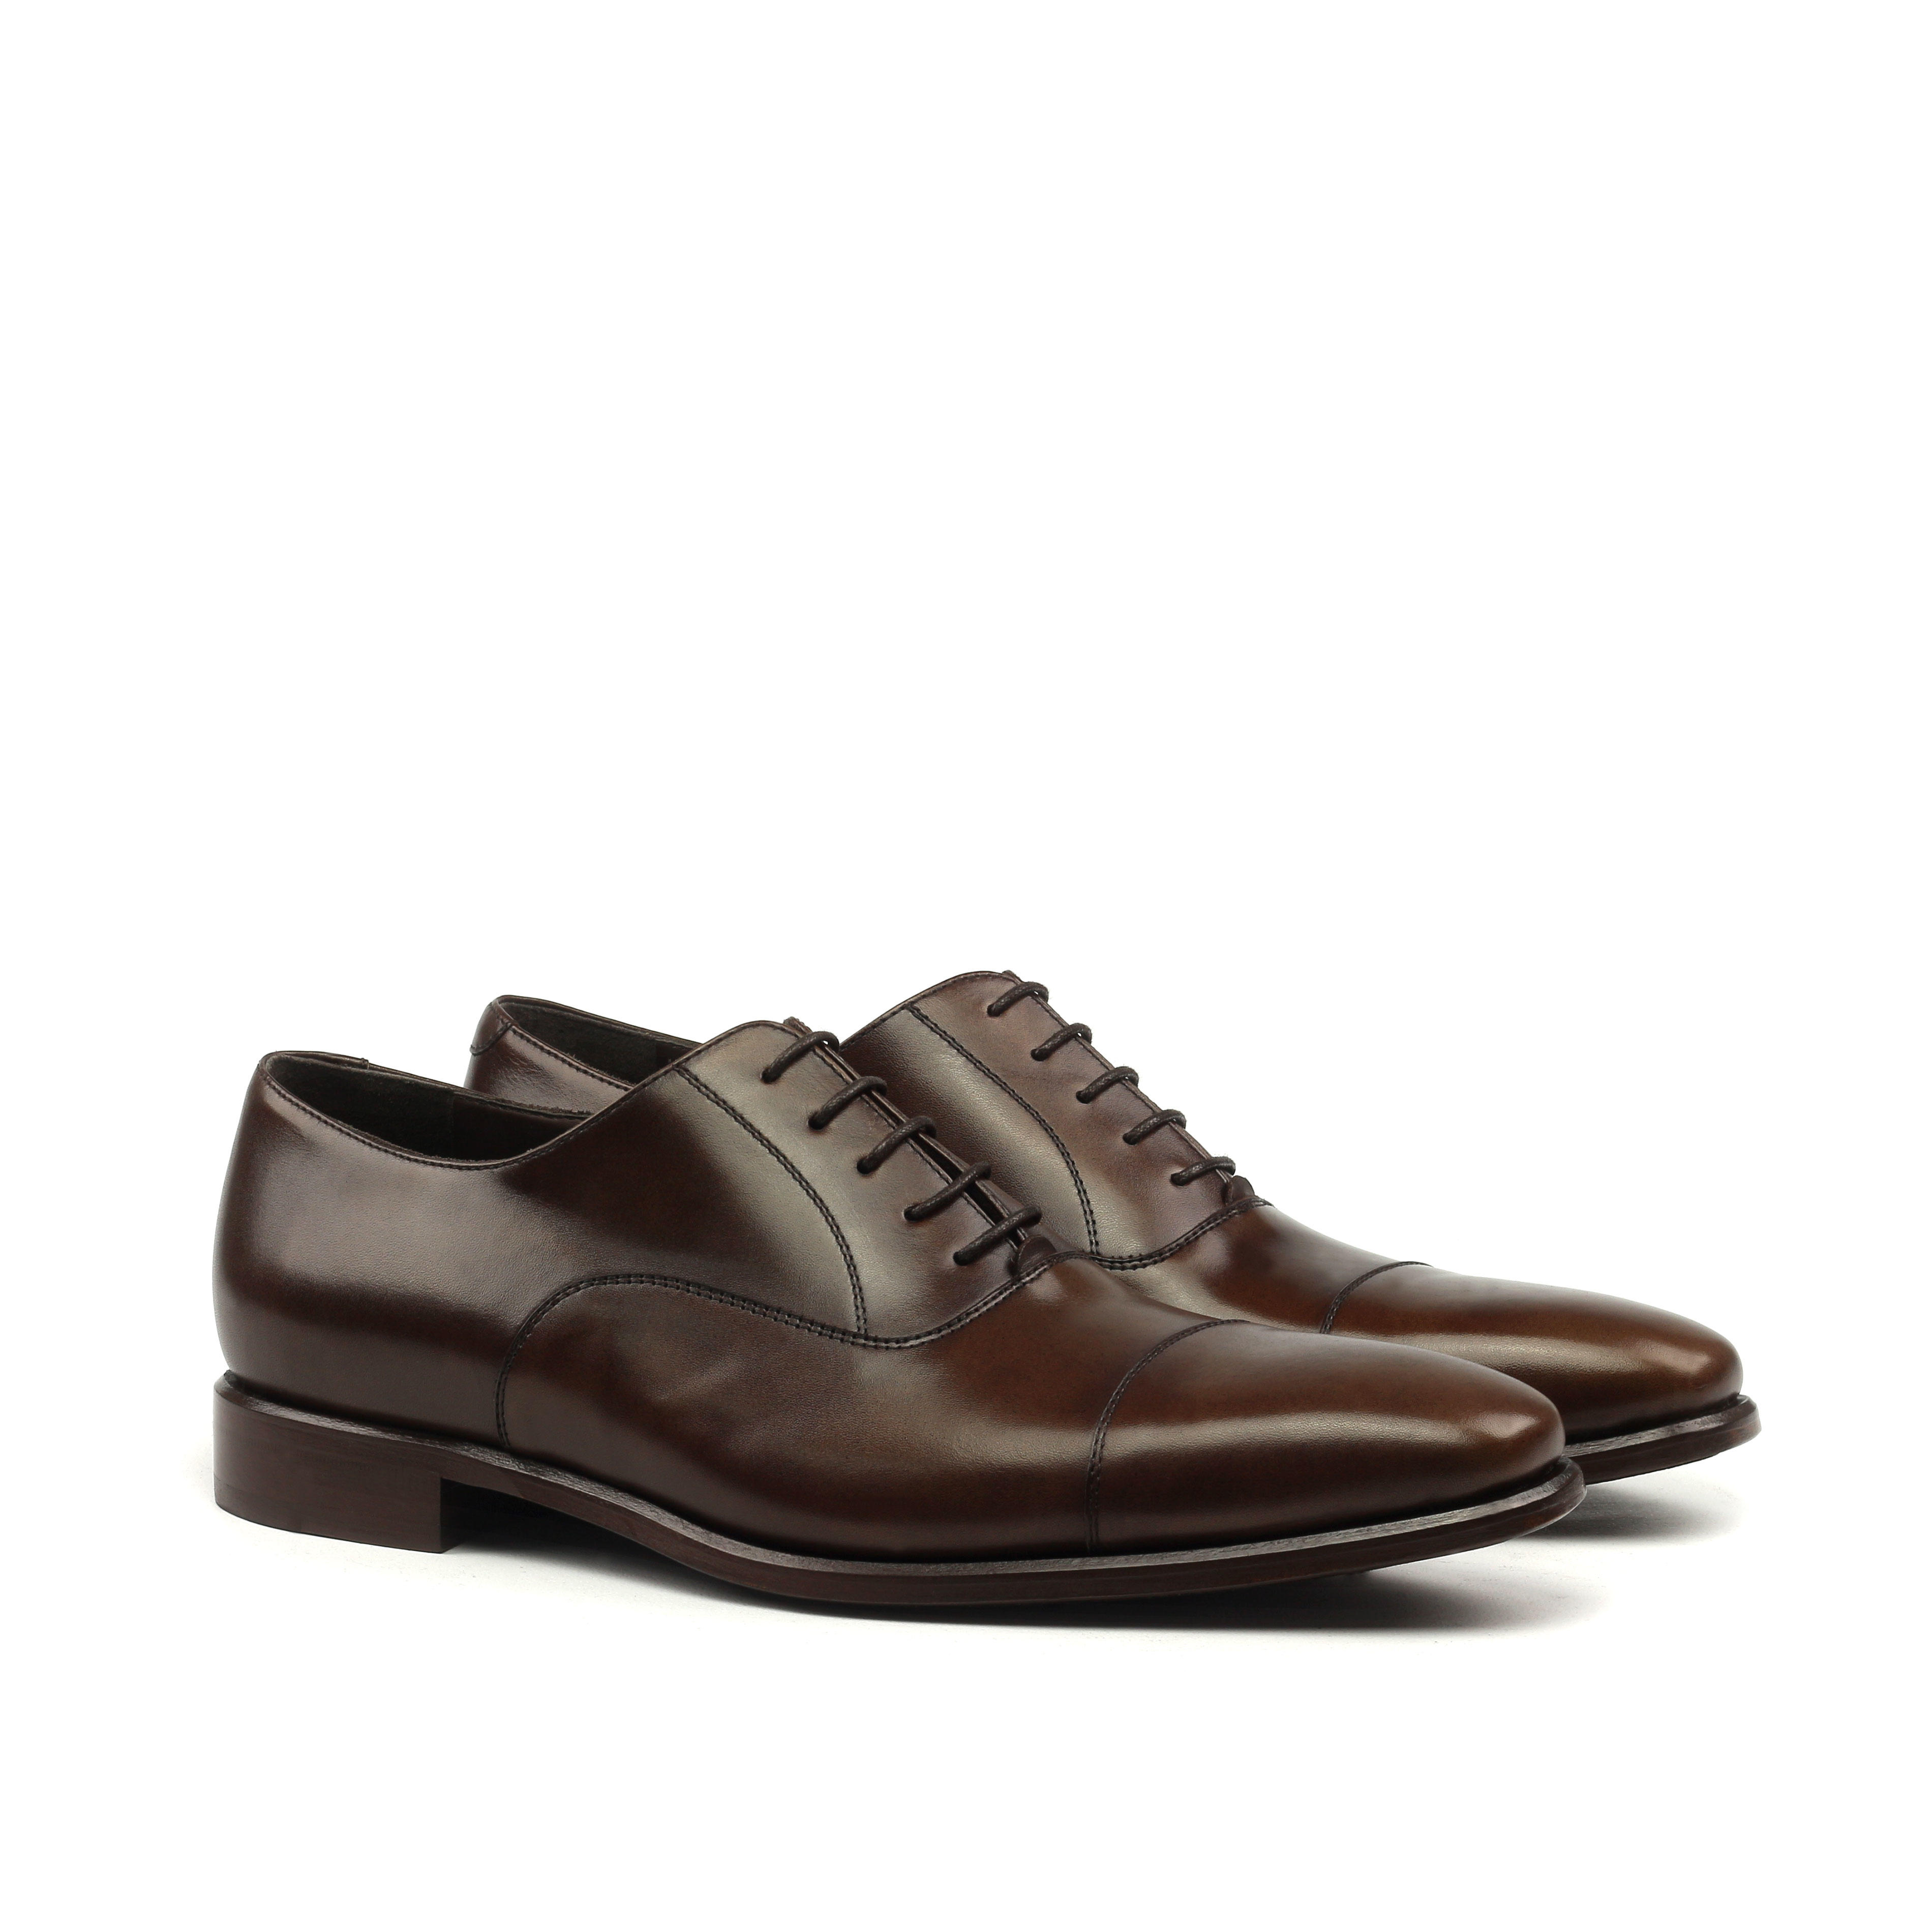 MANOR OF LONDON 'The Oxford' Brown Painted Calfskin Shoe Luxury Custom Initials Monogrammed Front Side View